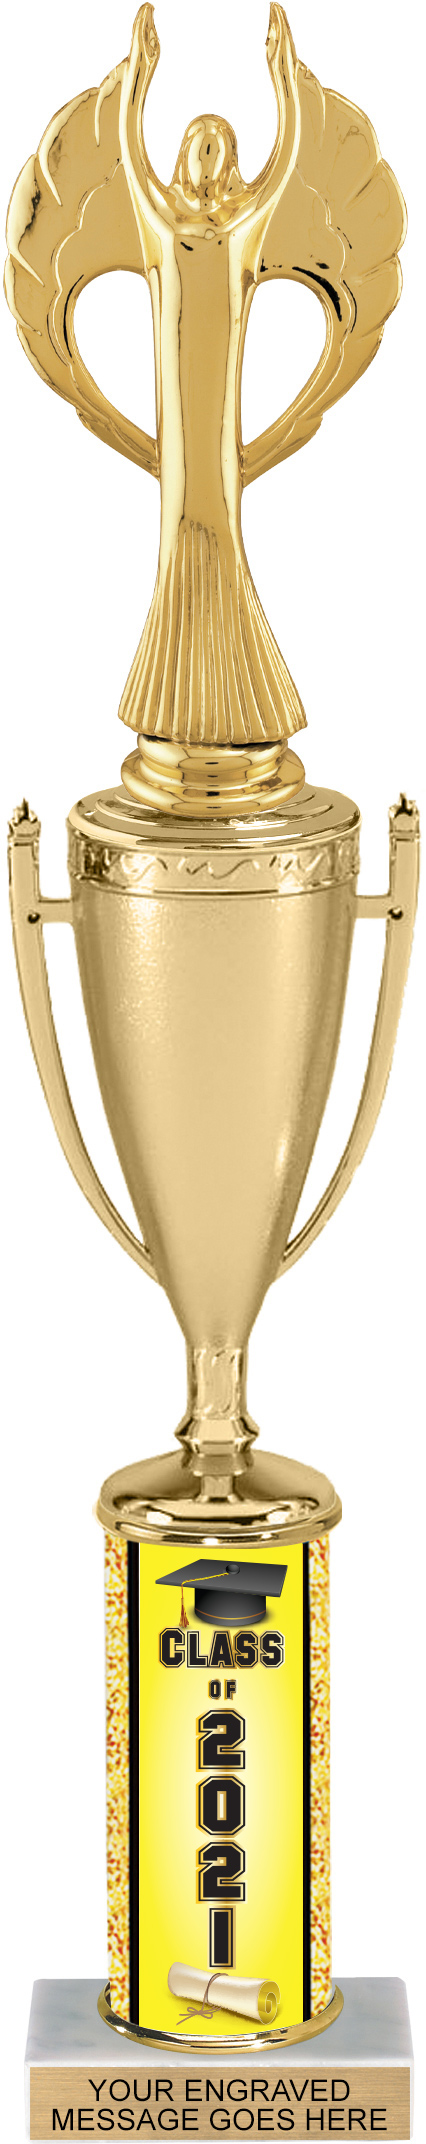 Class of 2021 Column Cup Trophy - 15 inch